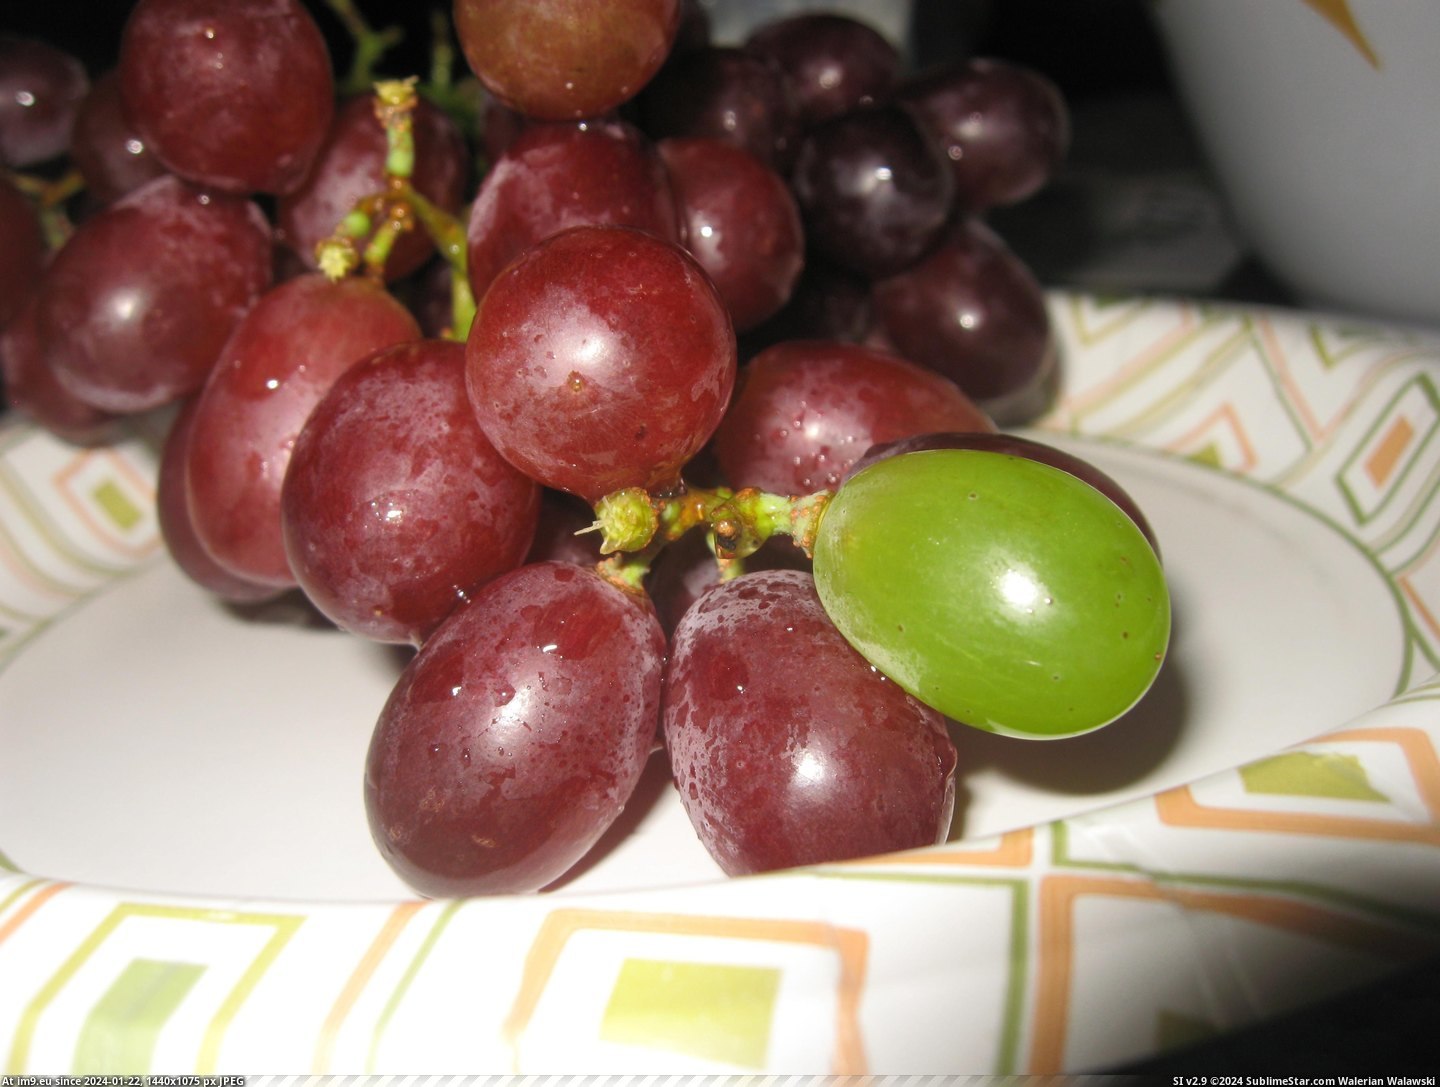 #One #Green #Grapes #Grape #Cluster #Purple #Growing [Mildlyinteresting] I found one green grape growing on a cluster of purple grapes Pic. (Bild von album My r/MILDLYINTERESTING favs))